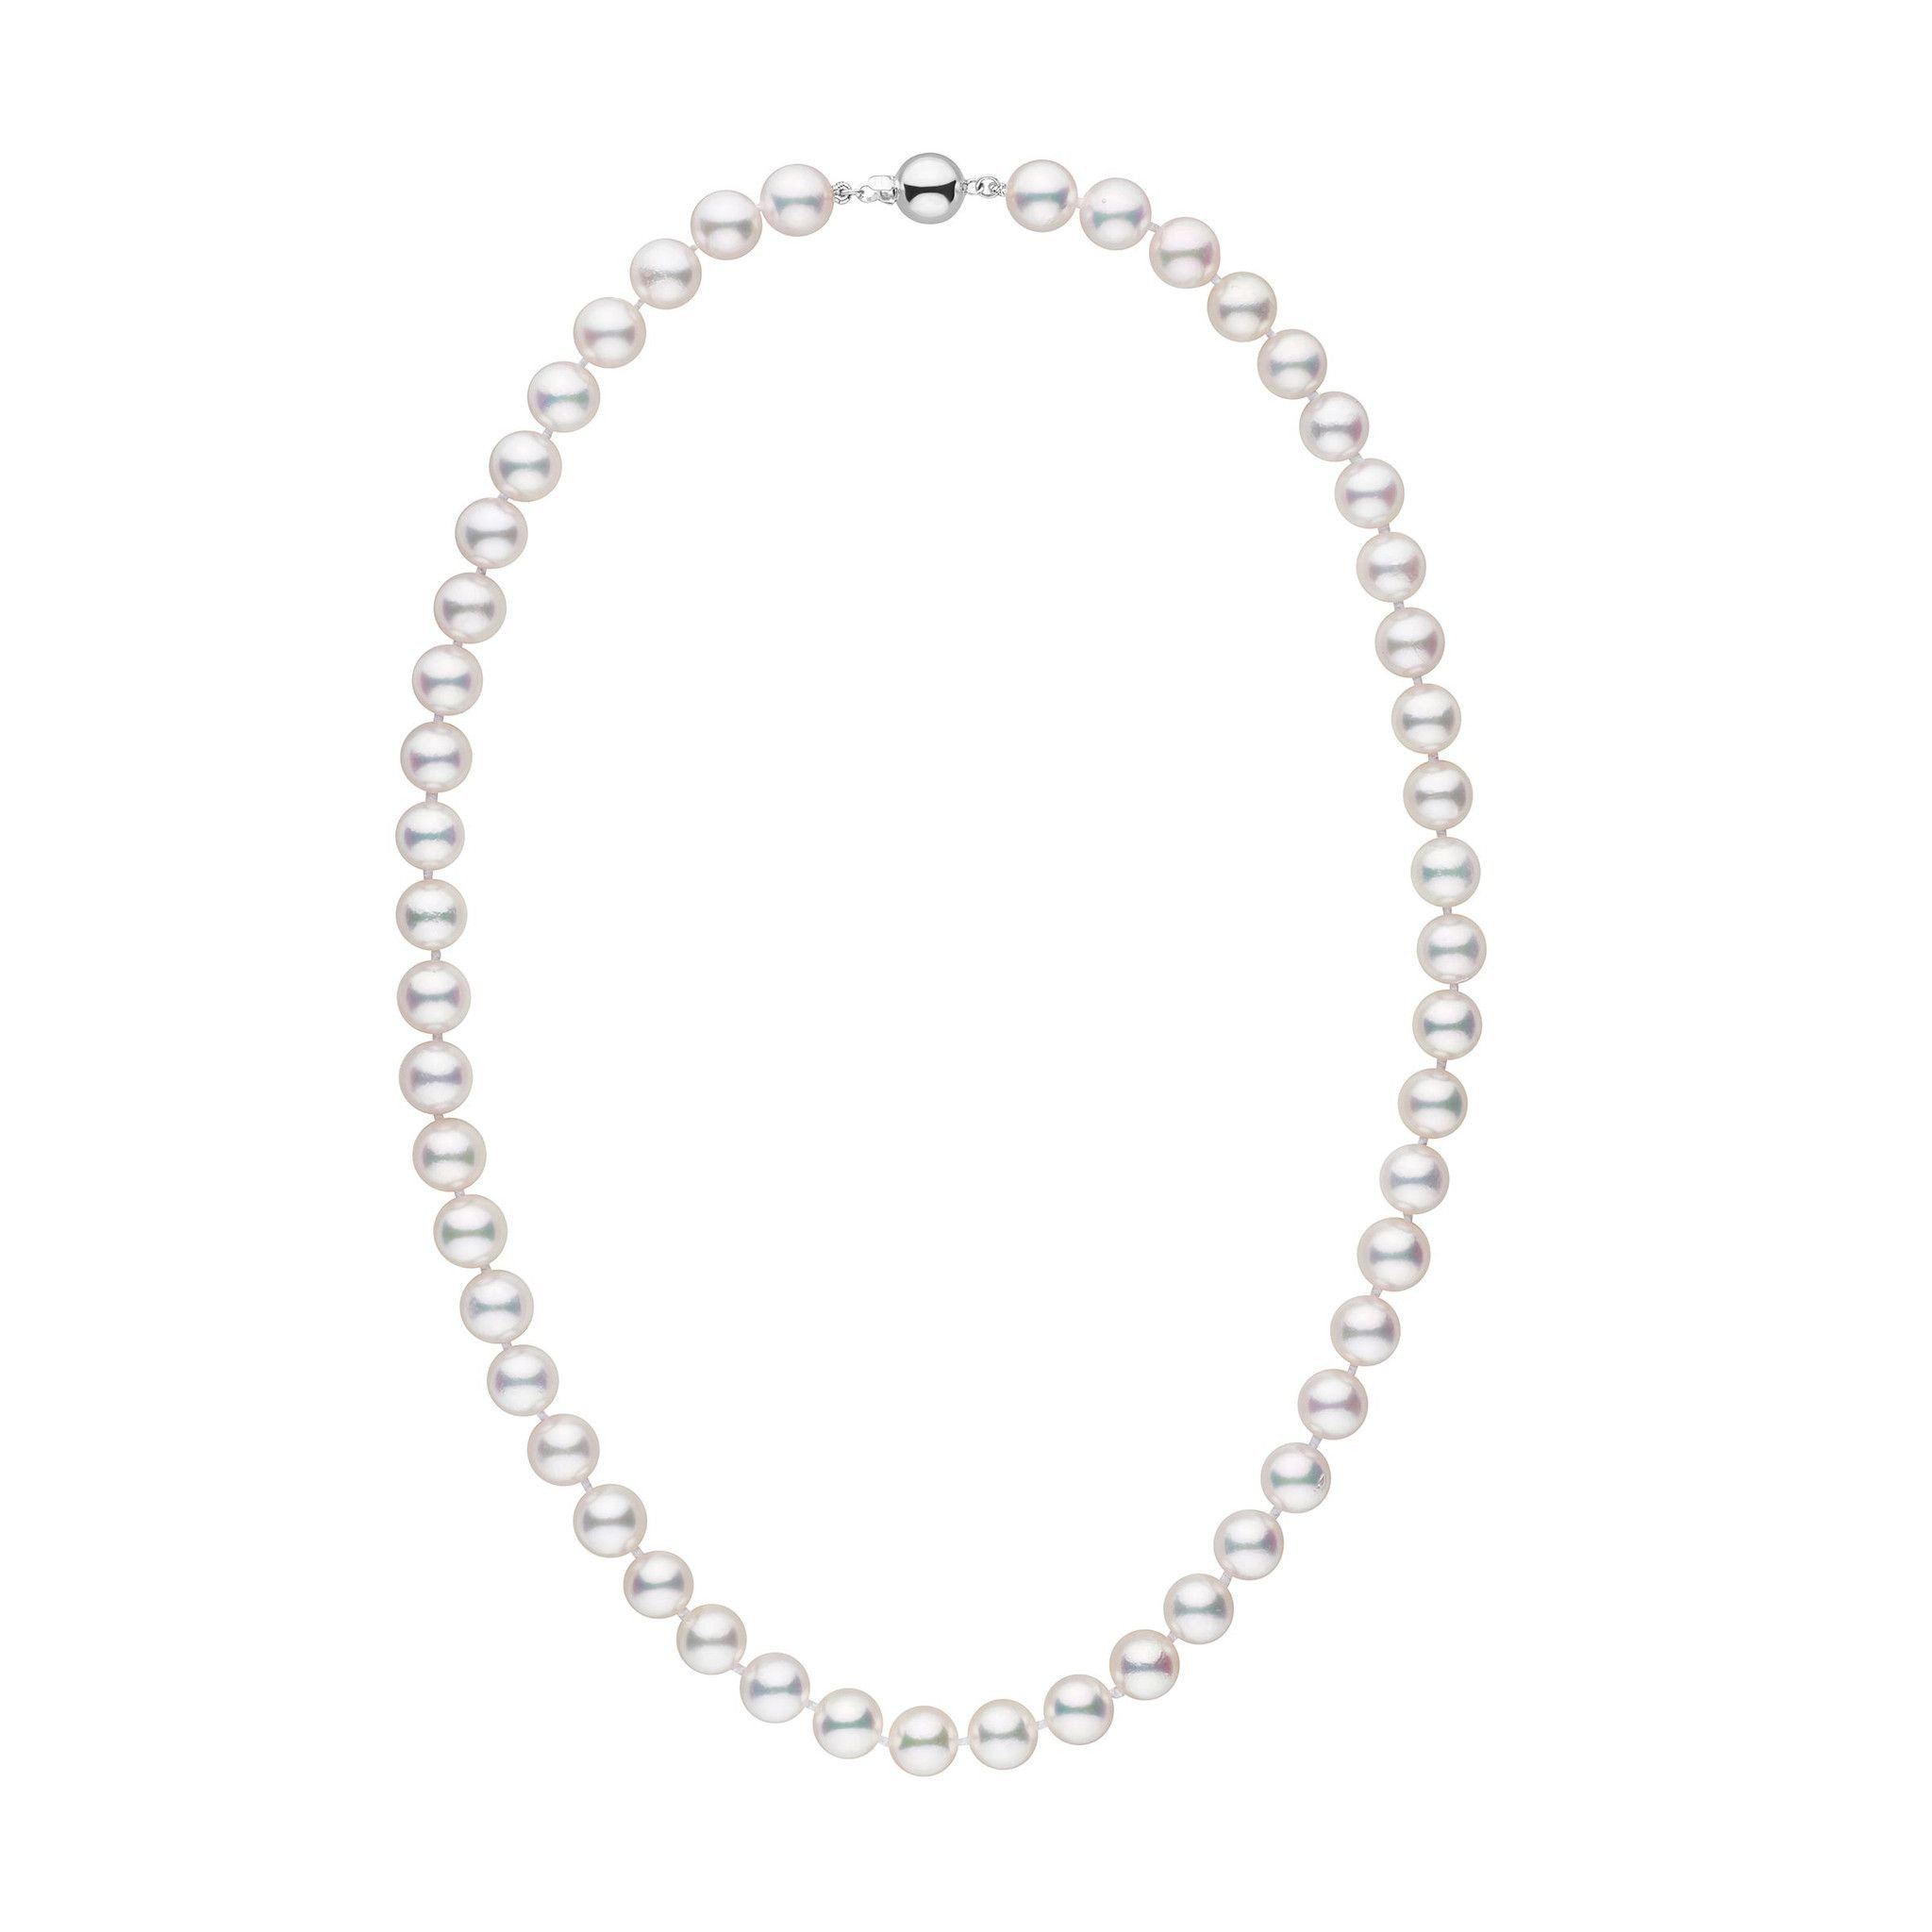 8.0-8.5 mm 18 inch AAA White Akoya Pearl Necklace white gold